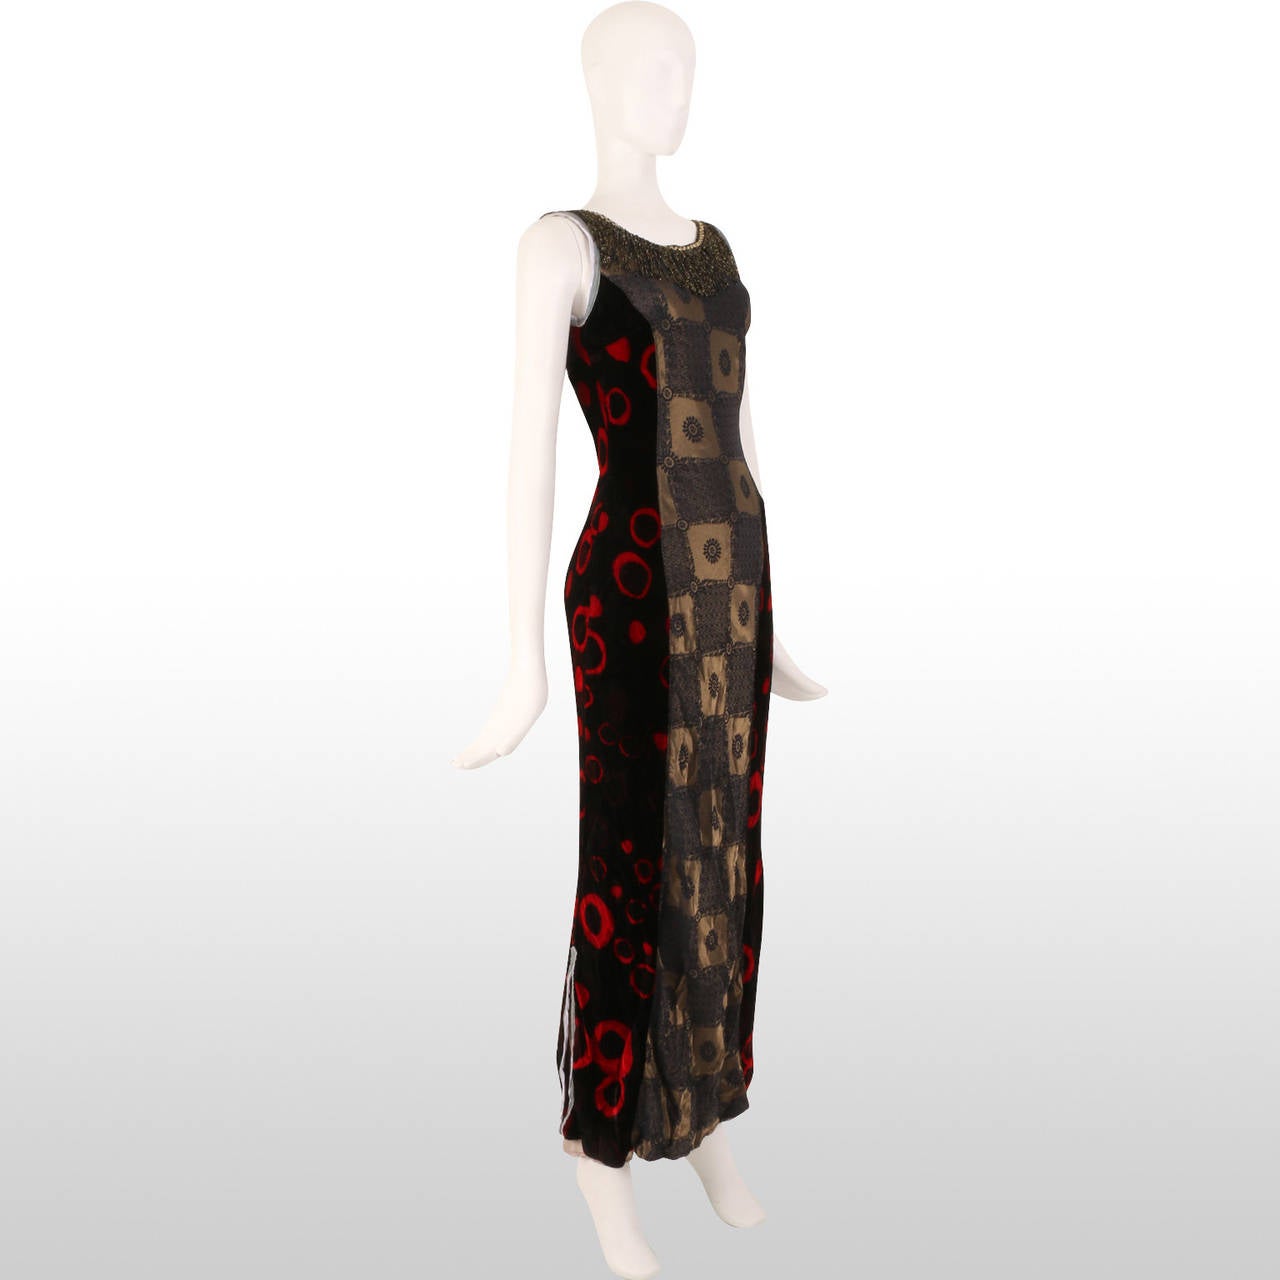 This original Voyage dress holds a variety of textures with the use of black and crimson velvet for a majority of the dress with a contrasting gold and steel grey embroidery metallic panel down the centre of the garment. The luxurious feel of the